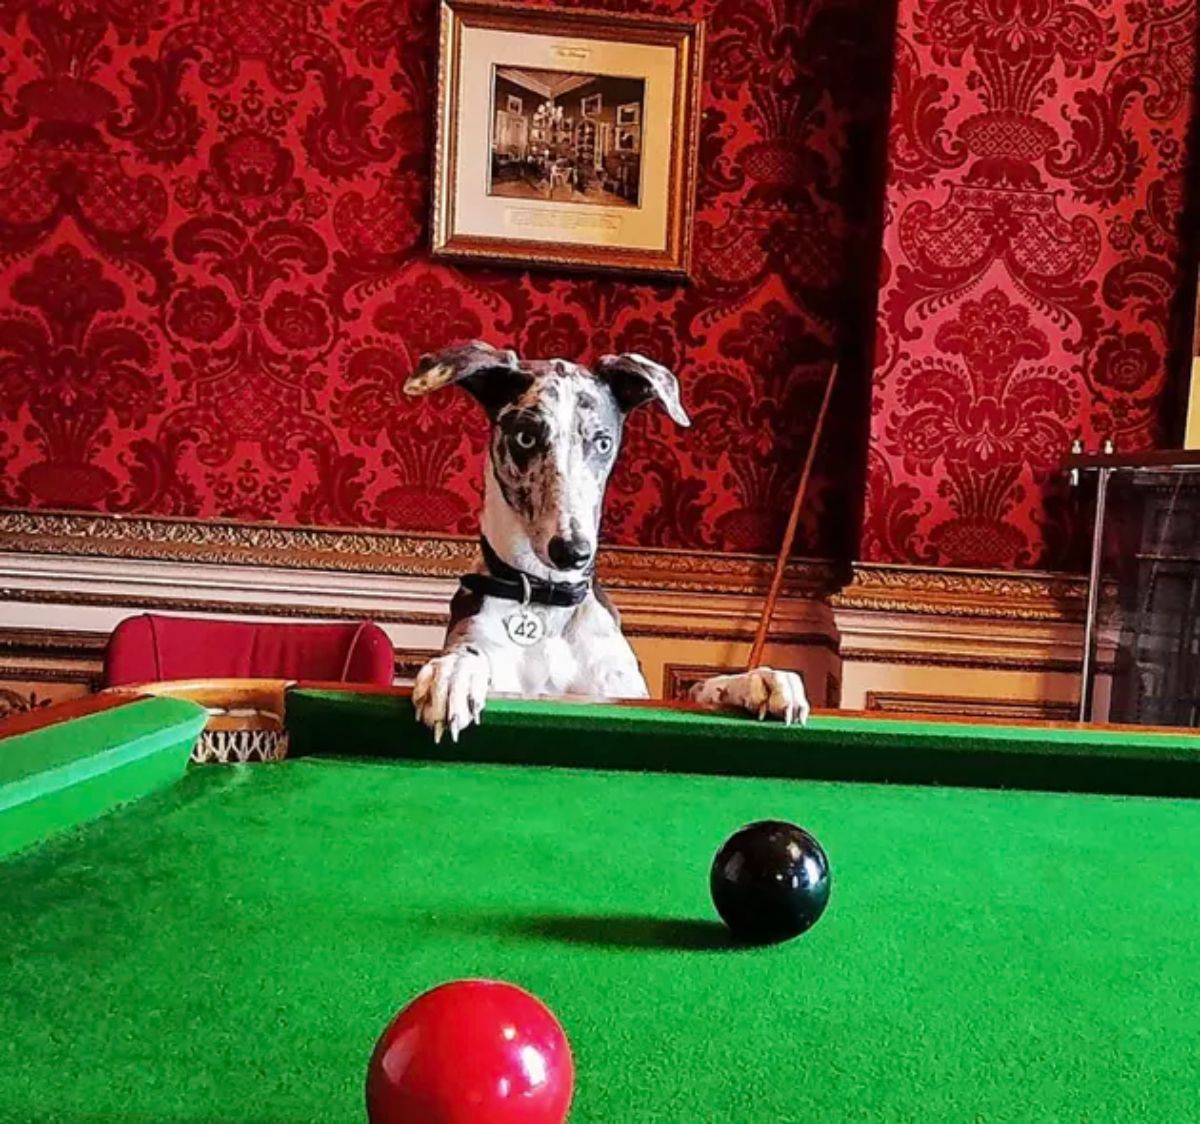 white and grey dog standing on hind legs with front paws on a pool table next to a pool cue